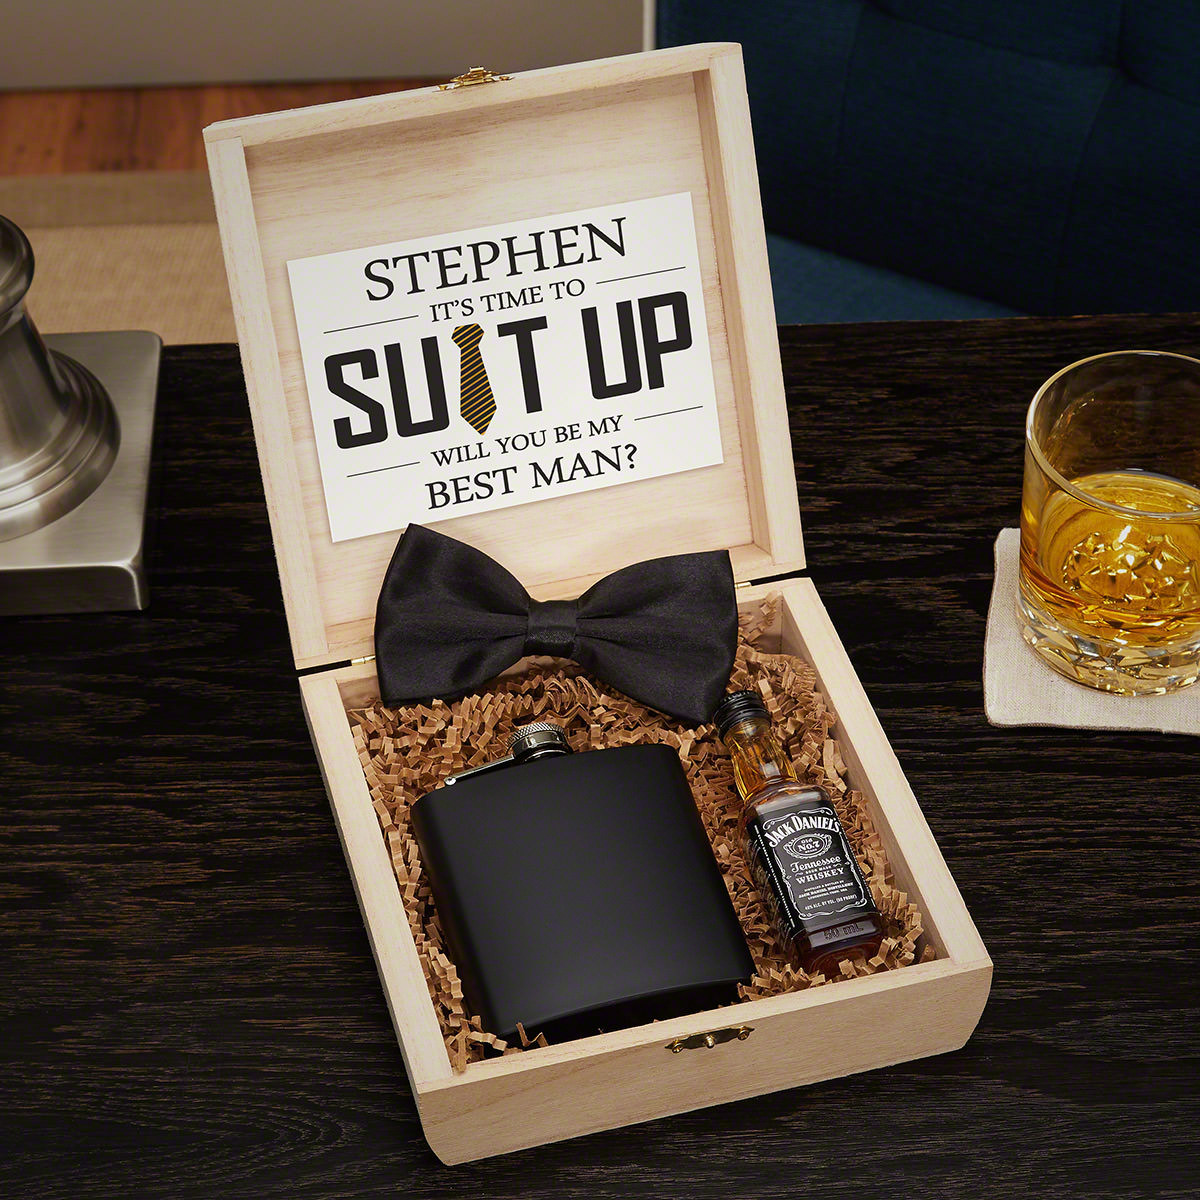 DIY Groomsmen Gifts
 Personalized Groomsmen Gifts and Wooden Crate Set